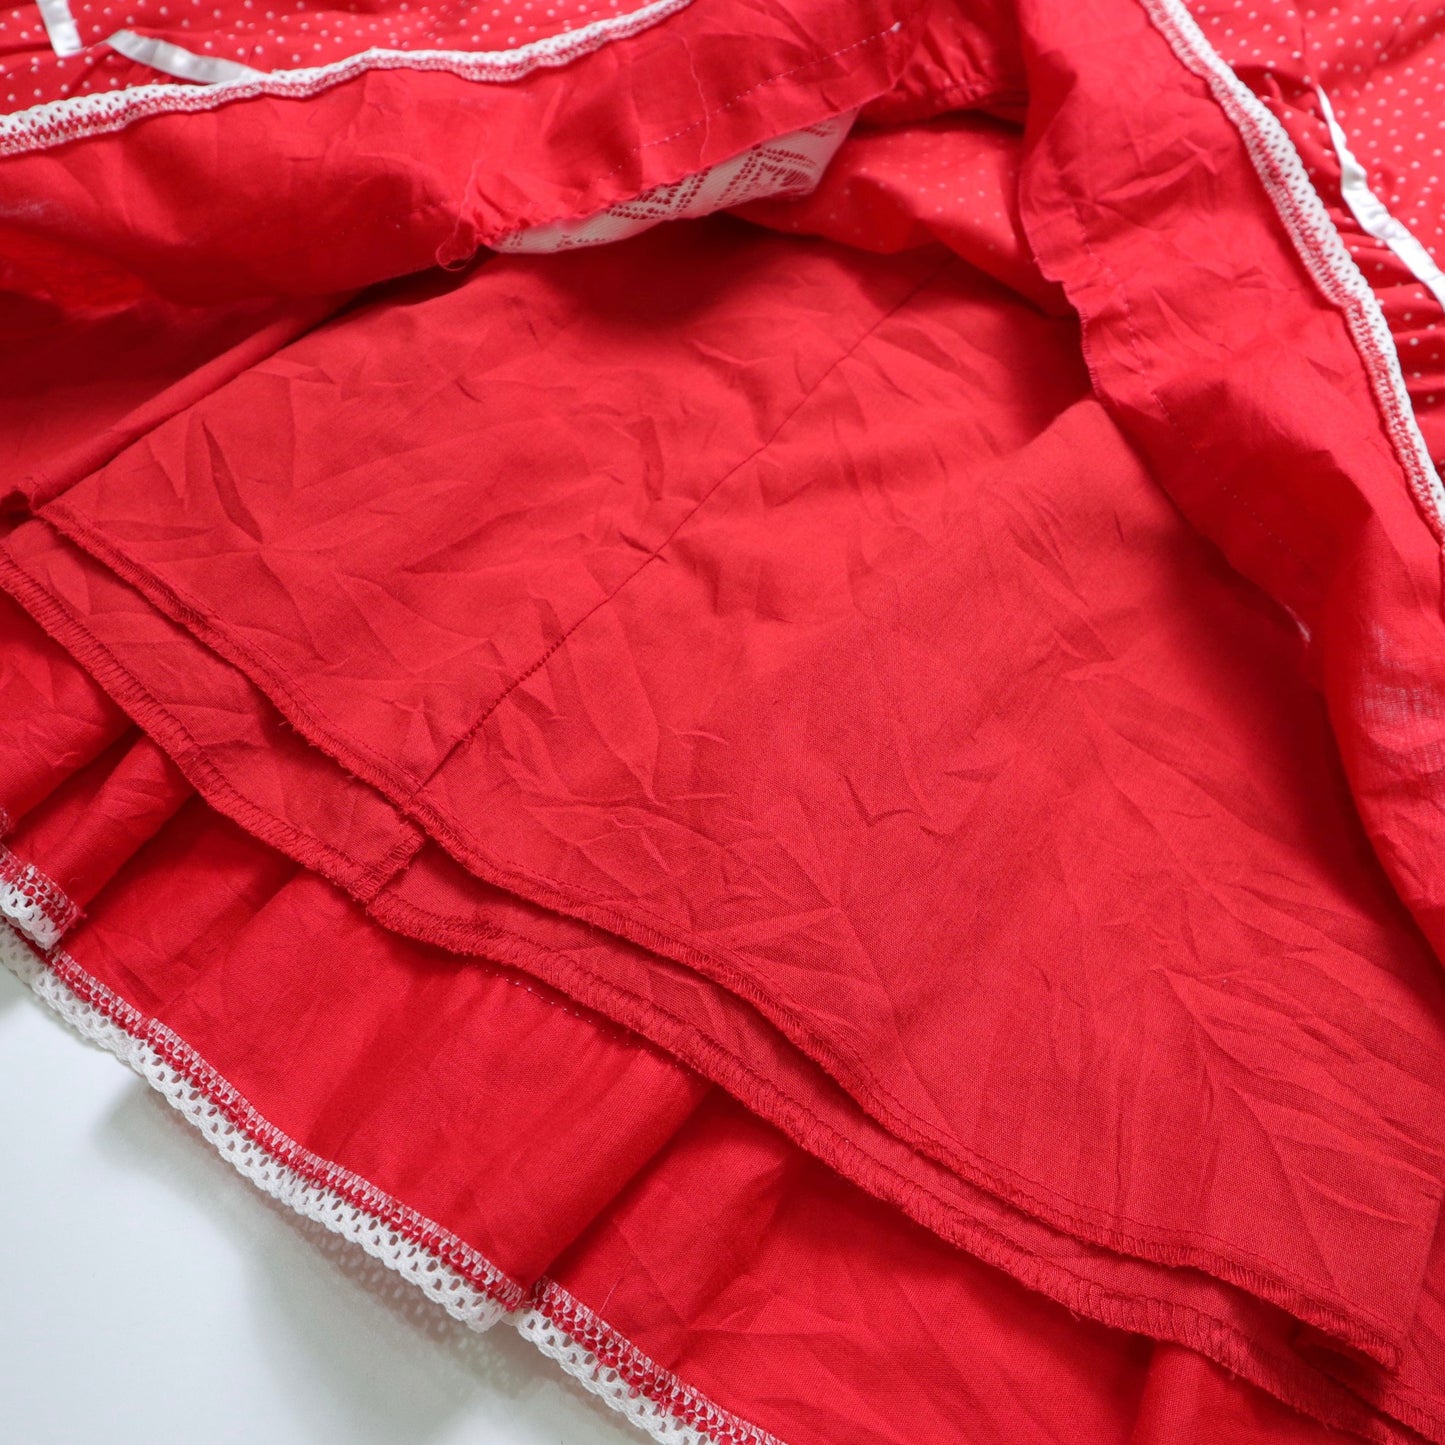 1980s red dotted lace trim skirt